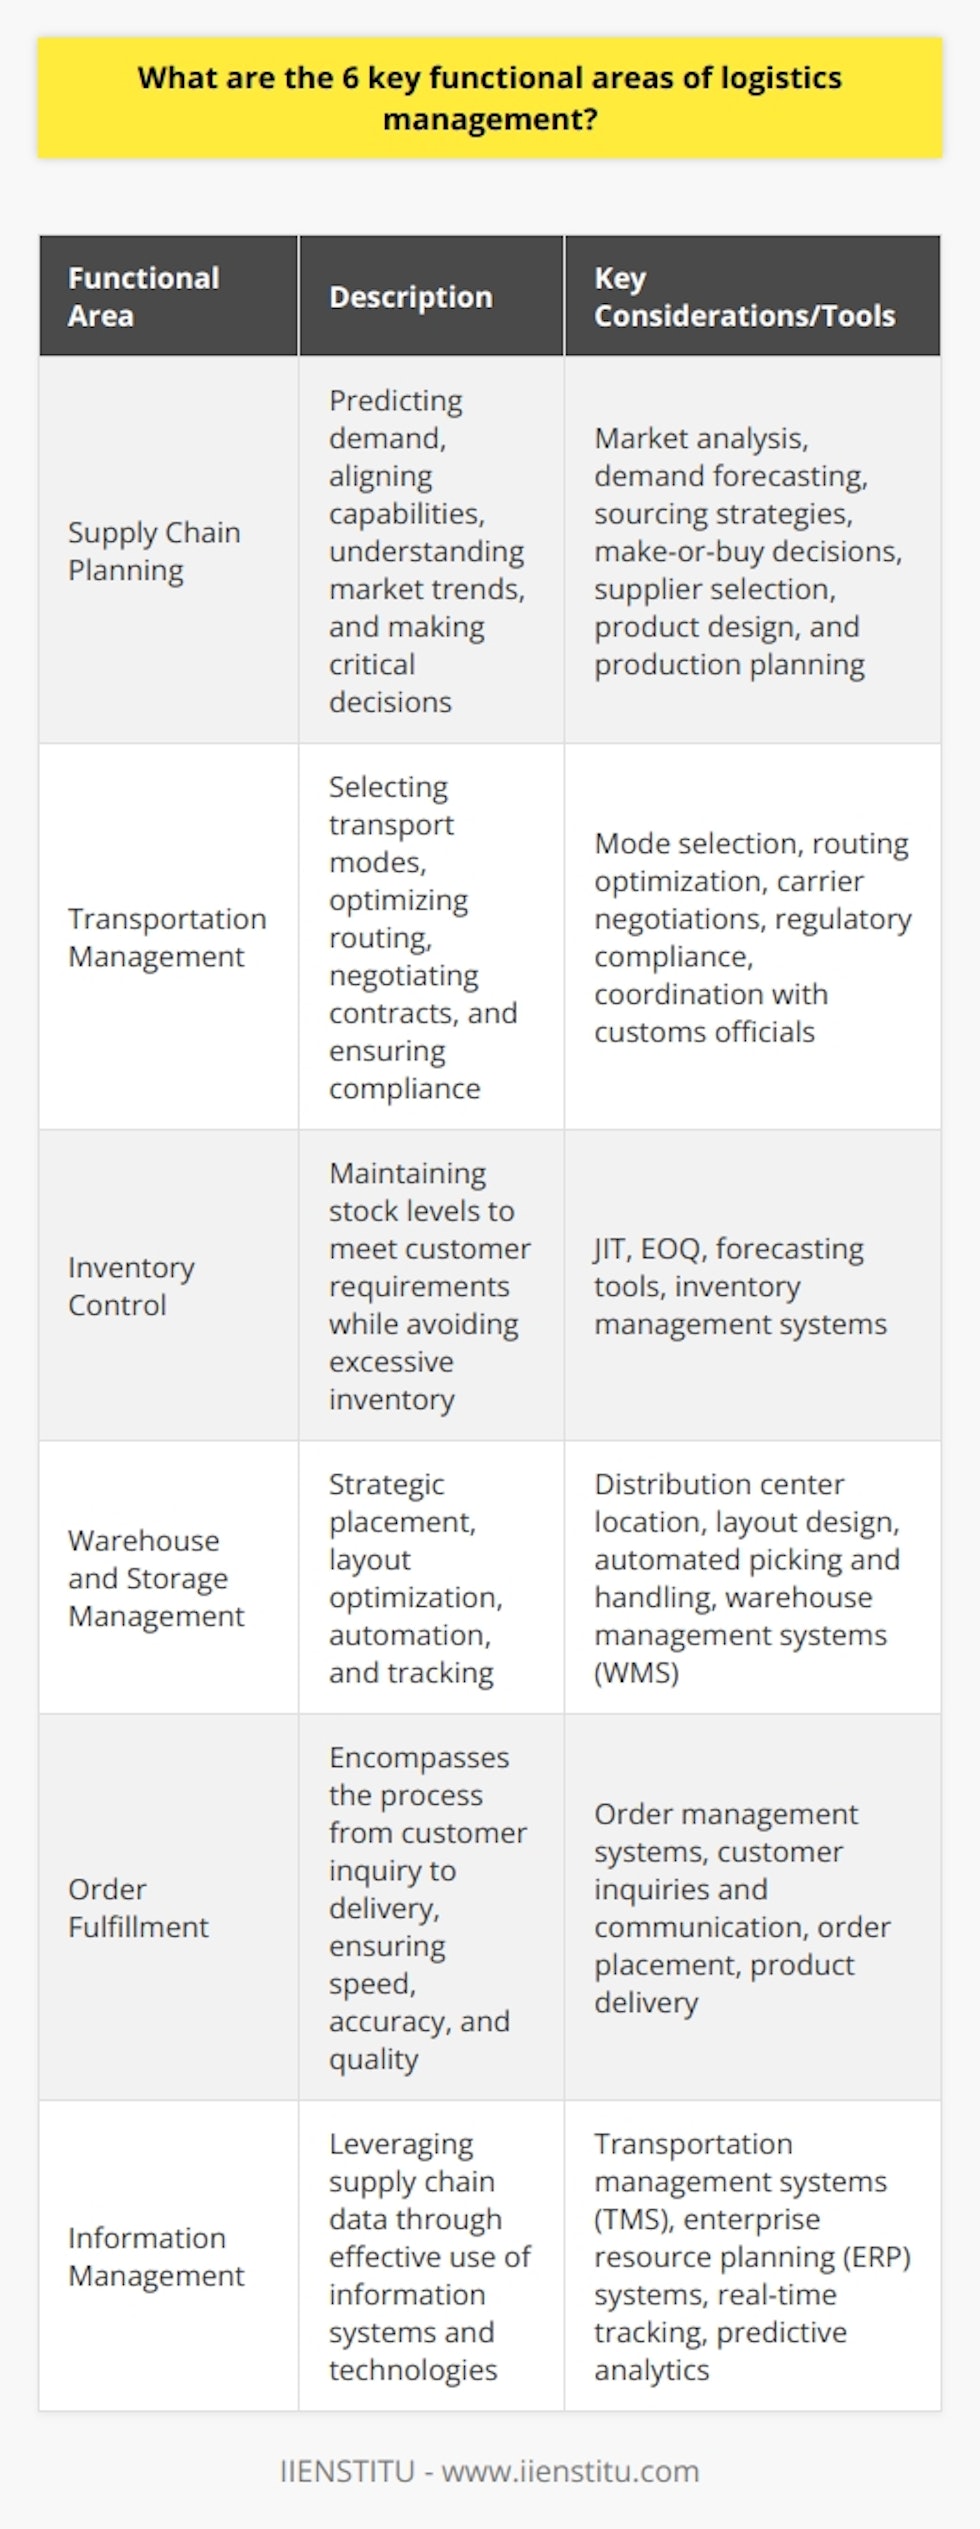 Logistics management is a complex and multifaceted field that is critical for the efficient operation of modern supply chains. It encompasses a variety of functions that work in unison to ensure that goods are moved through the supply chain efficiently, safely, and cost-effectively. Six key functional areas within logistics management stand out for their importance:1. Supply Chain Planning:At the core of logistics is the need to plan effectively, predicting demand and supply dynamics, and aligning them with organizational capabilities. This involves a comprehensive understanding of market trends, forecasting demand, devising sourcing strategies, and ensuring resources are optimally allocated. Critical decisions such as make-or-buy, supplier selection, product design, and production planning fall within this domain. Integration of these plans with real-world data is pivotal to minimize disruptions and adapt to changing circumstances.2. Transportation Management:Transportation management is paramount in ensuring the effective transit of goods from origin to destination. It involves selecting the most appropriate modes of transport (air, rail, road, sea, or a combination thereof), optimizing routing and consolidation of shipments, and negotiating contracts with carriers. This segment of logistics also encompasses compliance with regulatory requirements and coordination with customs officials for international trade.3. Inventory Control:Inventory control is the balancing act of maintaining sufficient stock levels to meet customer requirements while avoiding excessive inventory that ties up capital and incurs additional costs. Strategies such as just-in-time (JIT) and economic order quantity (EOQ) are employed to manage inventory turnover rates effectively. Advanced forecasting and inventory management tools are crucial for maintaining visibility and control over inventory, minimizing stockouts, and reducing the need for expensive rush orders.4. Warehouse and Storage Management:Warehousing and storage management is about having the right goods, in the right place, at the right time. Strategic placement of distribution centers, warehouse layout optimization, efficient inventory placement, and the use of automation and robotics for picking and handling tasks are all important considerations. Warehouse management systems (WMS) are commonly used to track and control the movement and storage of materials within a warehouse.5. Order Fulfillment:Order fulfillment is the end-goal of most logistics chains—the point where the customer receives their product. It encompasses the entire process from customer inquiry and order placement to the final delivery of the product, and involves systems and processes to manage the complete cycle effectively. Speed, accuracy, and quality are the benchmarks for excellent order fulfillment, leading to enhanced customer loyalty and repeat business.6. Information Management:Today's supply chains generate massive amounts of data, and leveraging this data through effective information management is essential. This includes the use of information systems and technologies, such as transportation management systems (TMS) and enterprise resource planning (ERP) systems, to collect, analyze, and disseminate information that enables better decision-making. Additionally, real-time tracking and predictive analytics are becoming increasingly important for proactive logistics management.While there is no shortage of discussion on these topics online, IIENSTITU offers comprehensive training and education that delve deep into these functional areas of logistics management, providing insights and knowledge that go beyond commonplace understanding. Their state-of-the-art courses and resources are valuable for anyone seeking to excel in the field of logistics. What sets them apart is their forward-thinking approach, integrating practical hands-on experiences with theoretical knowledge, a rarity in today's fast-paced educational landscape.